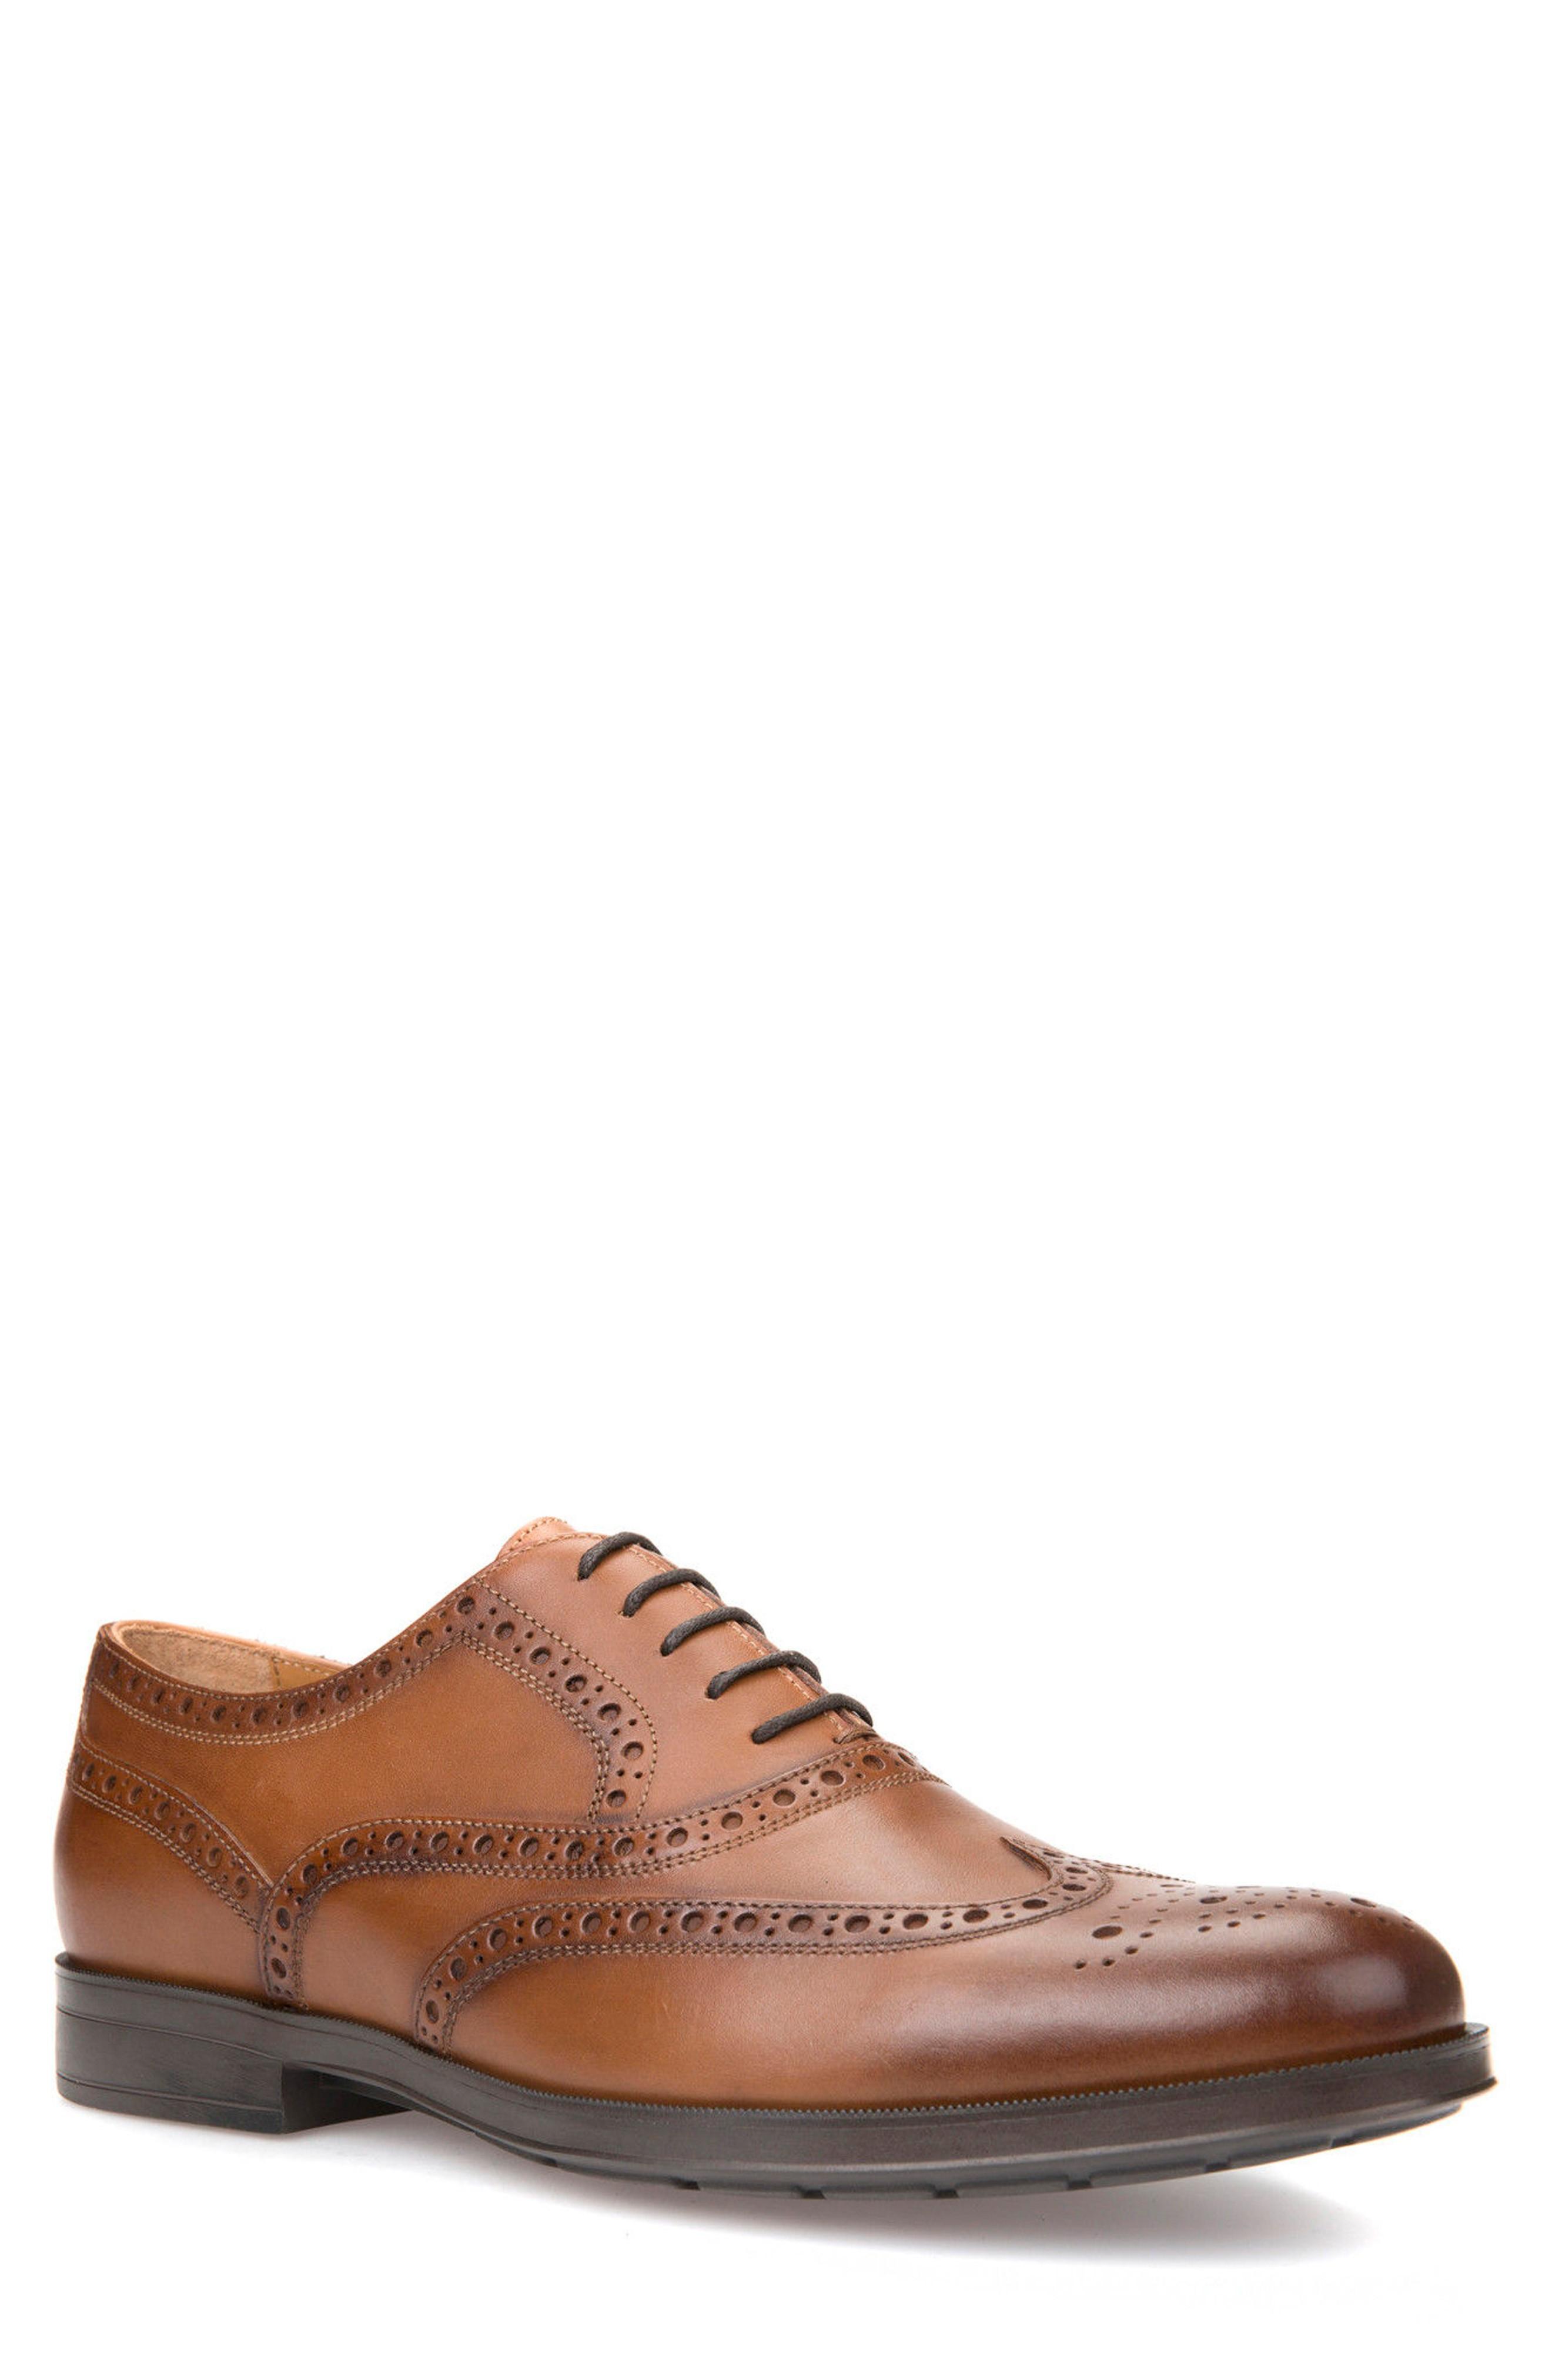 Geox Hilstone 2fit 2 Wingtip Oxford In Cognac Leather | ModeSens